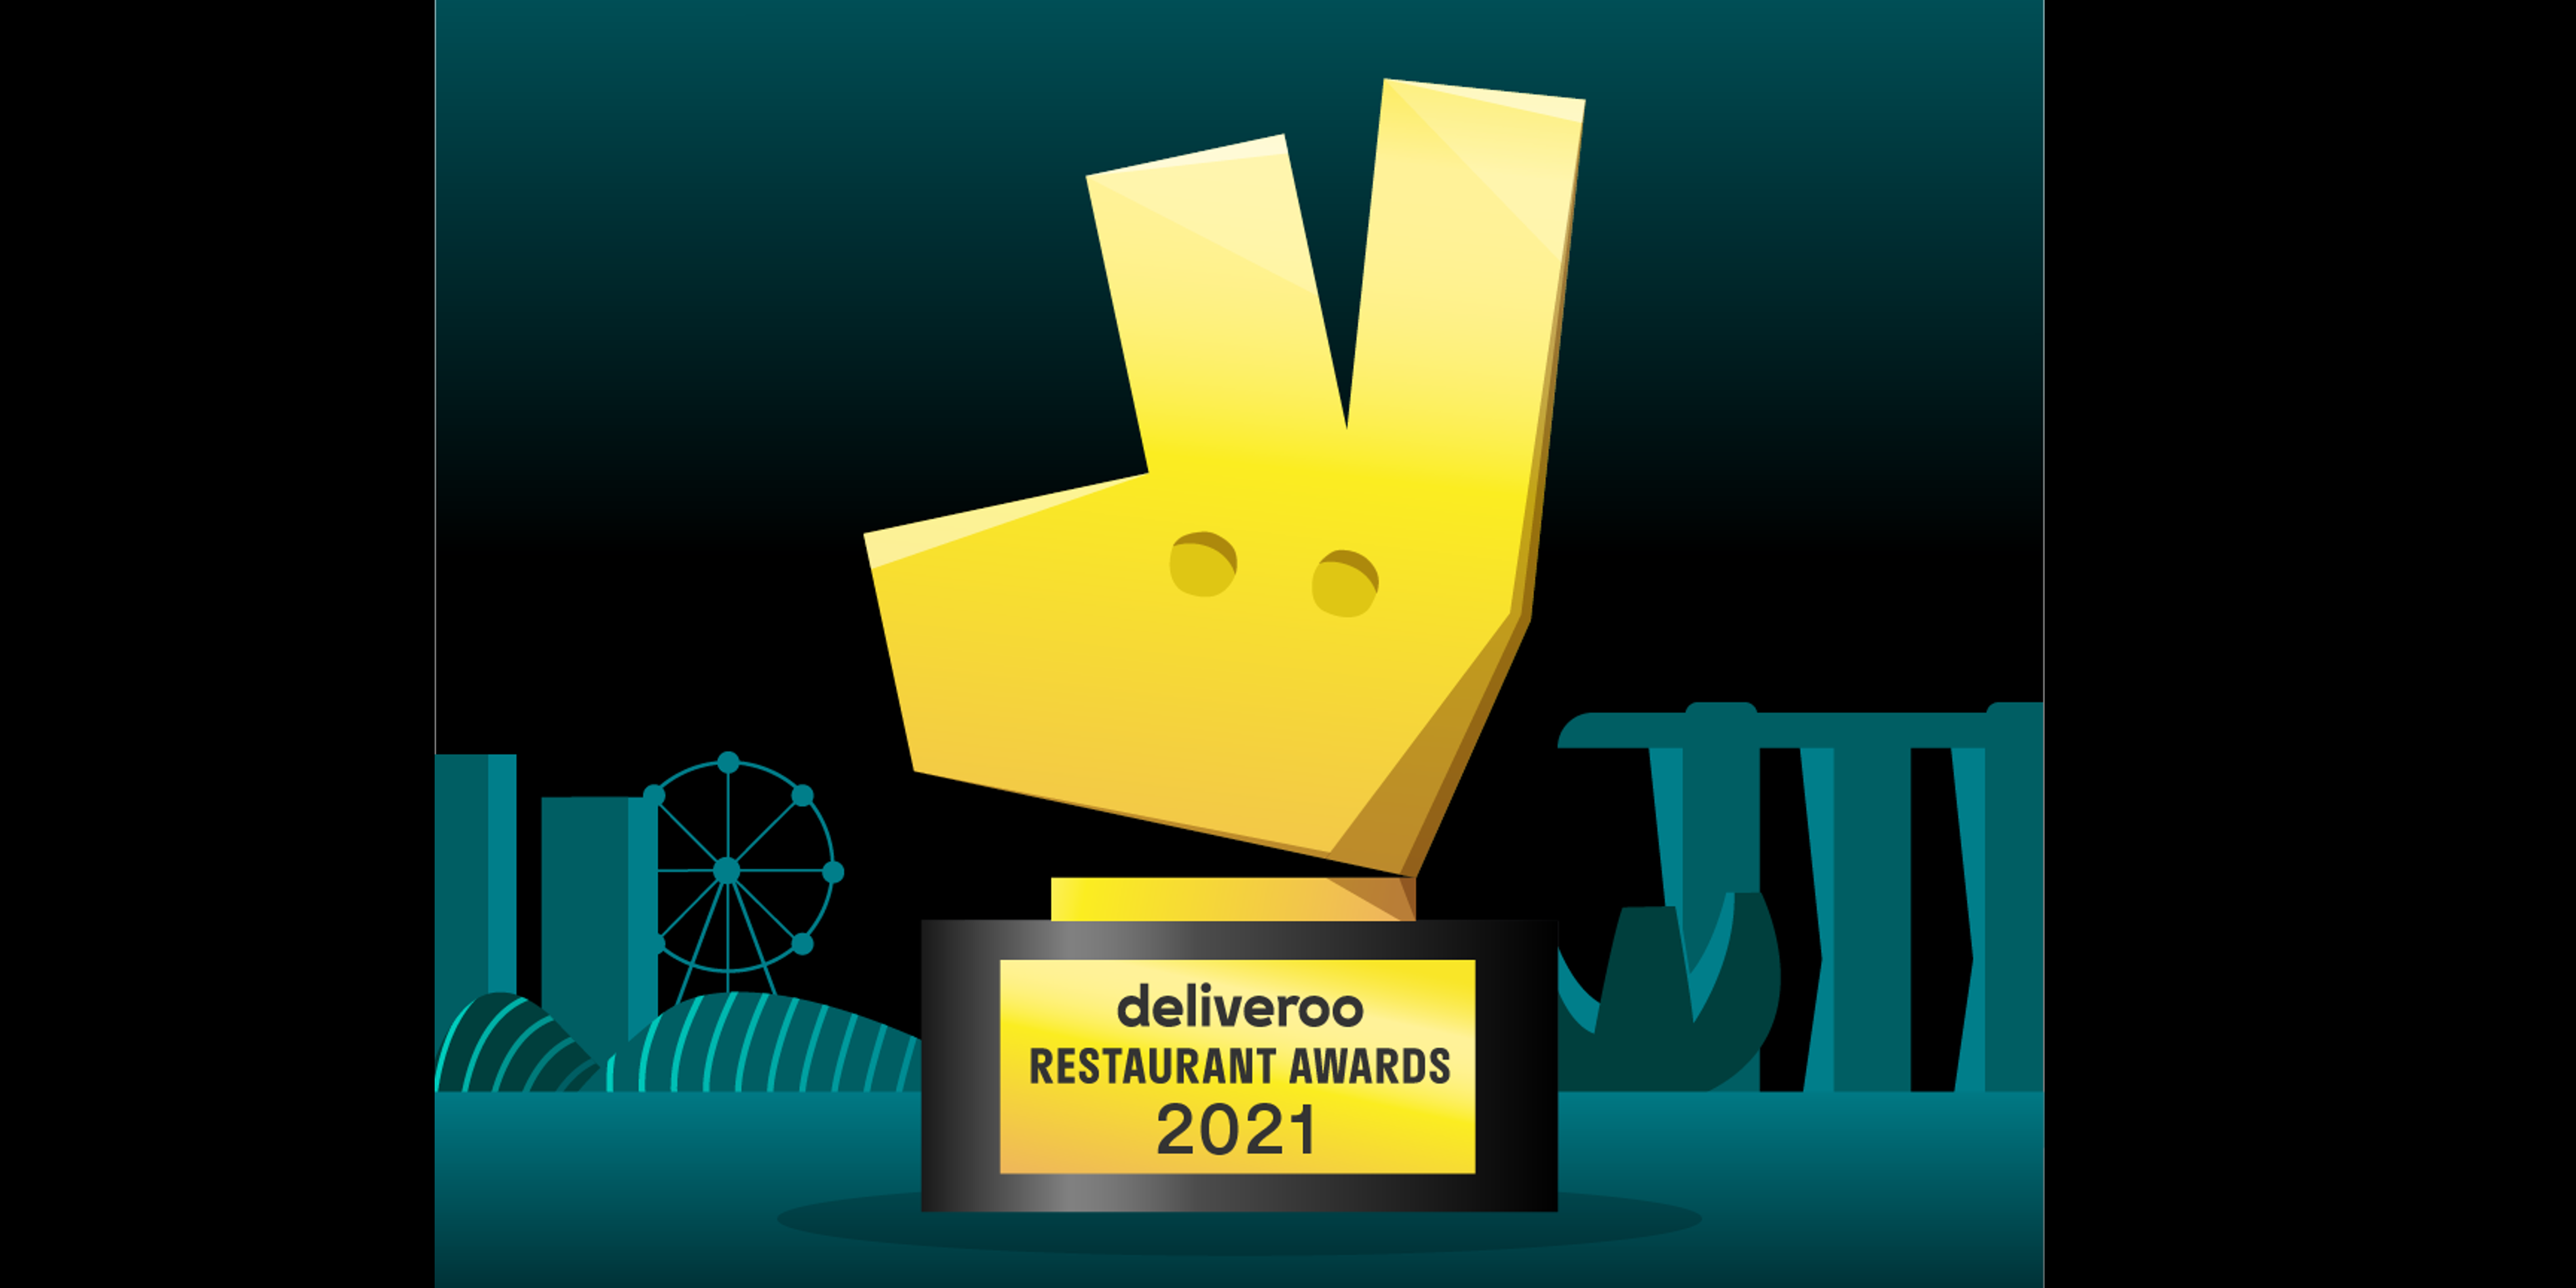 Vote for your favourites at the Deliveroo Restaurant Awards 2021 and win $200 weekly credits!